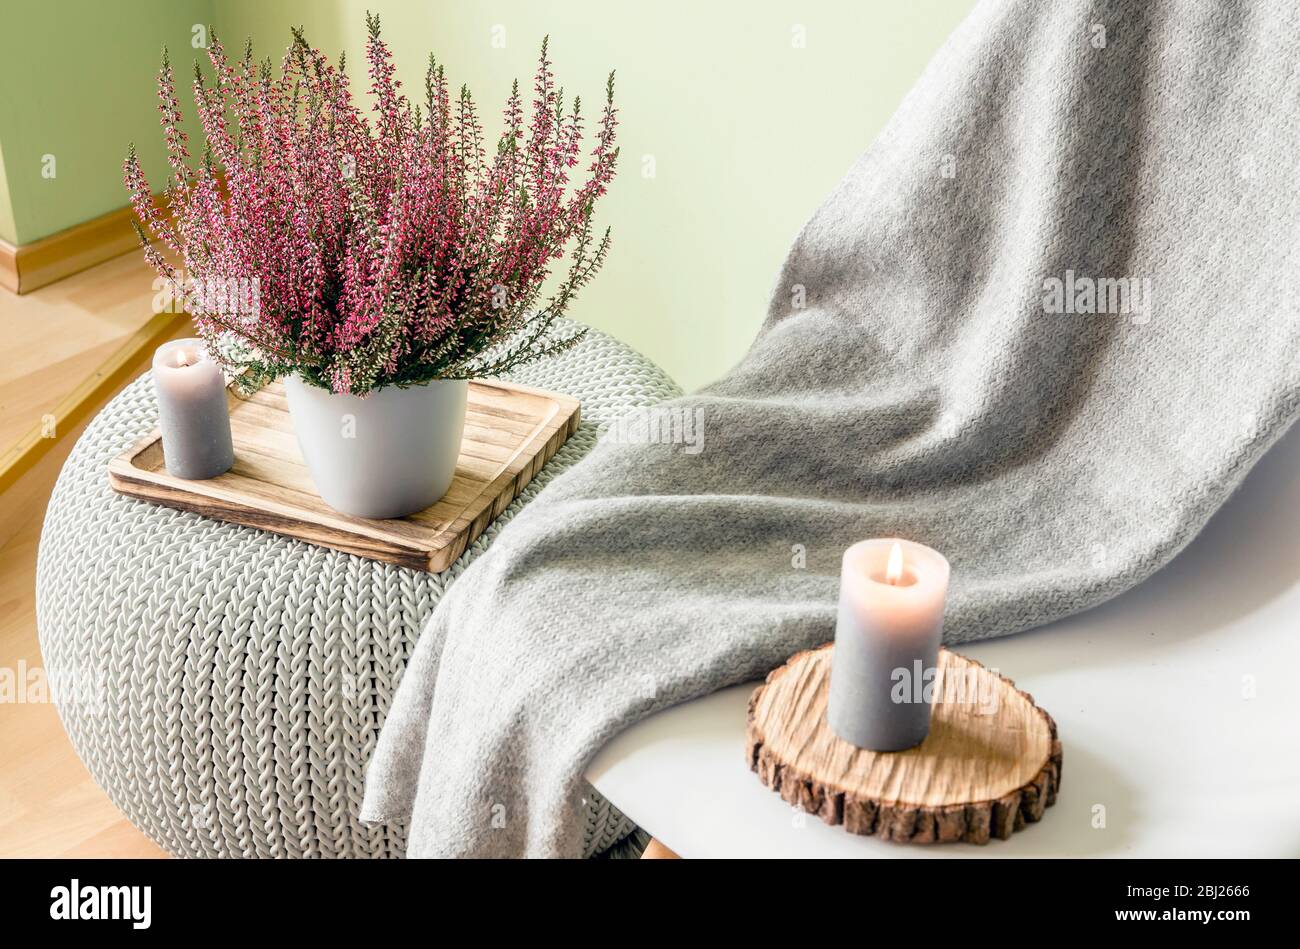 Common pink heather, Calluna vulgaris, ling flower in white pot with gray cozy plaid. Cozy autumn living space concept. Candlelight flame. Stock Photo